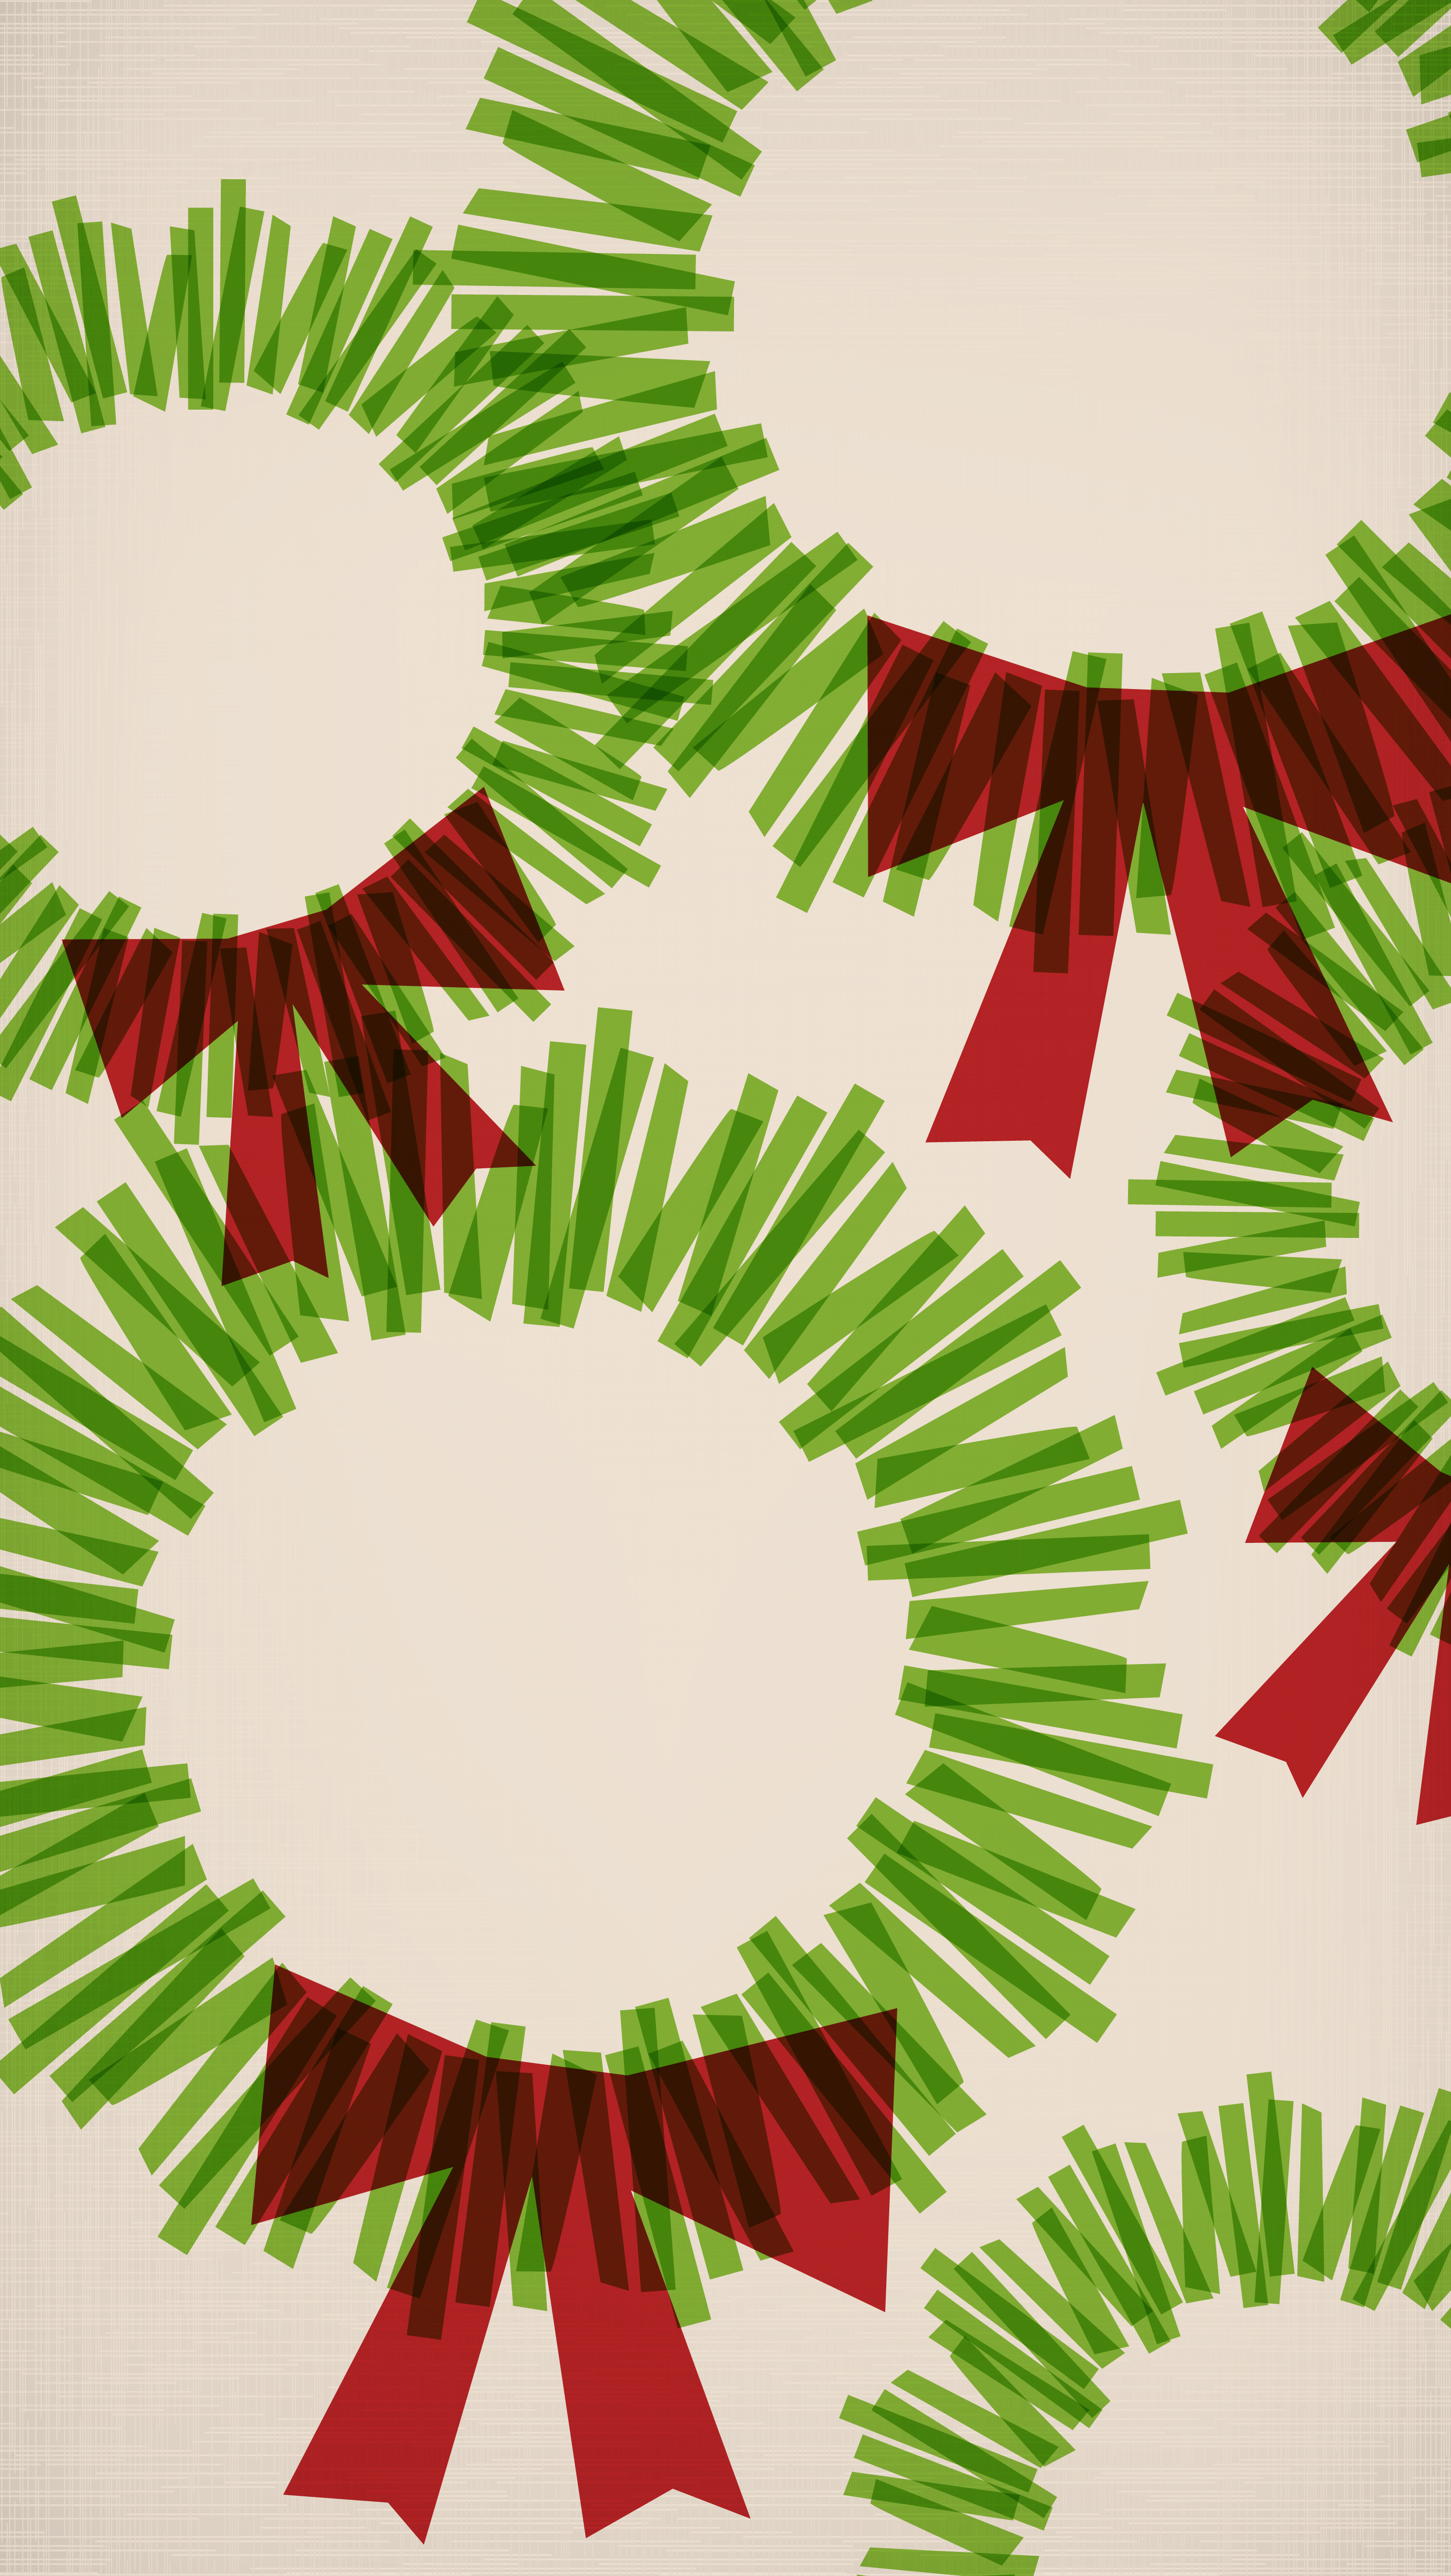 december iphone wallpaper,christmas decoration,leaf,wreath,holly,plant